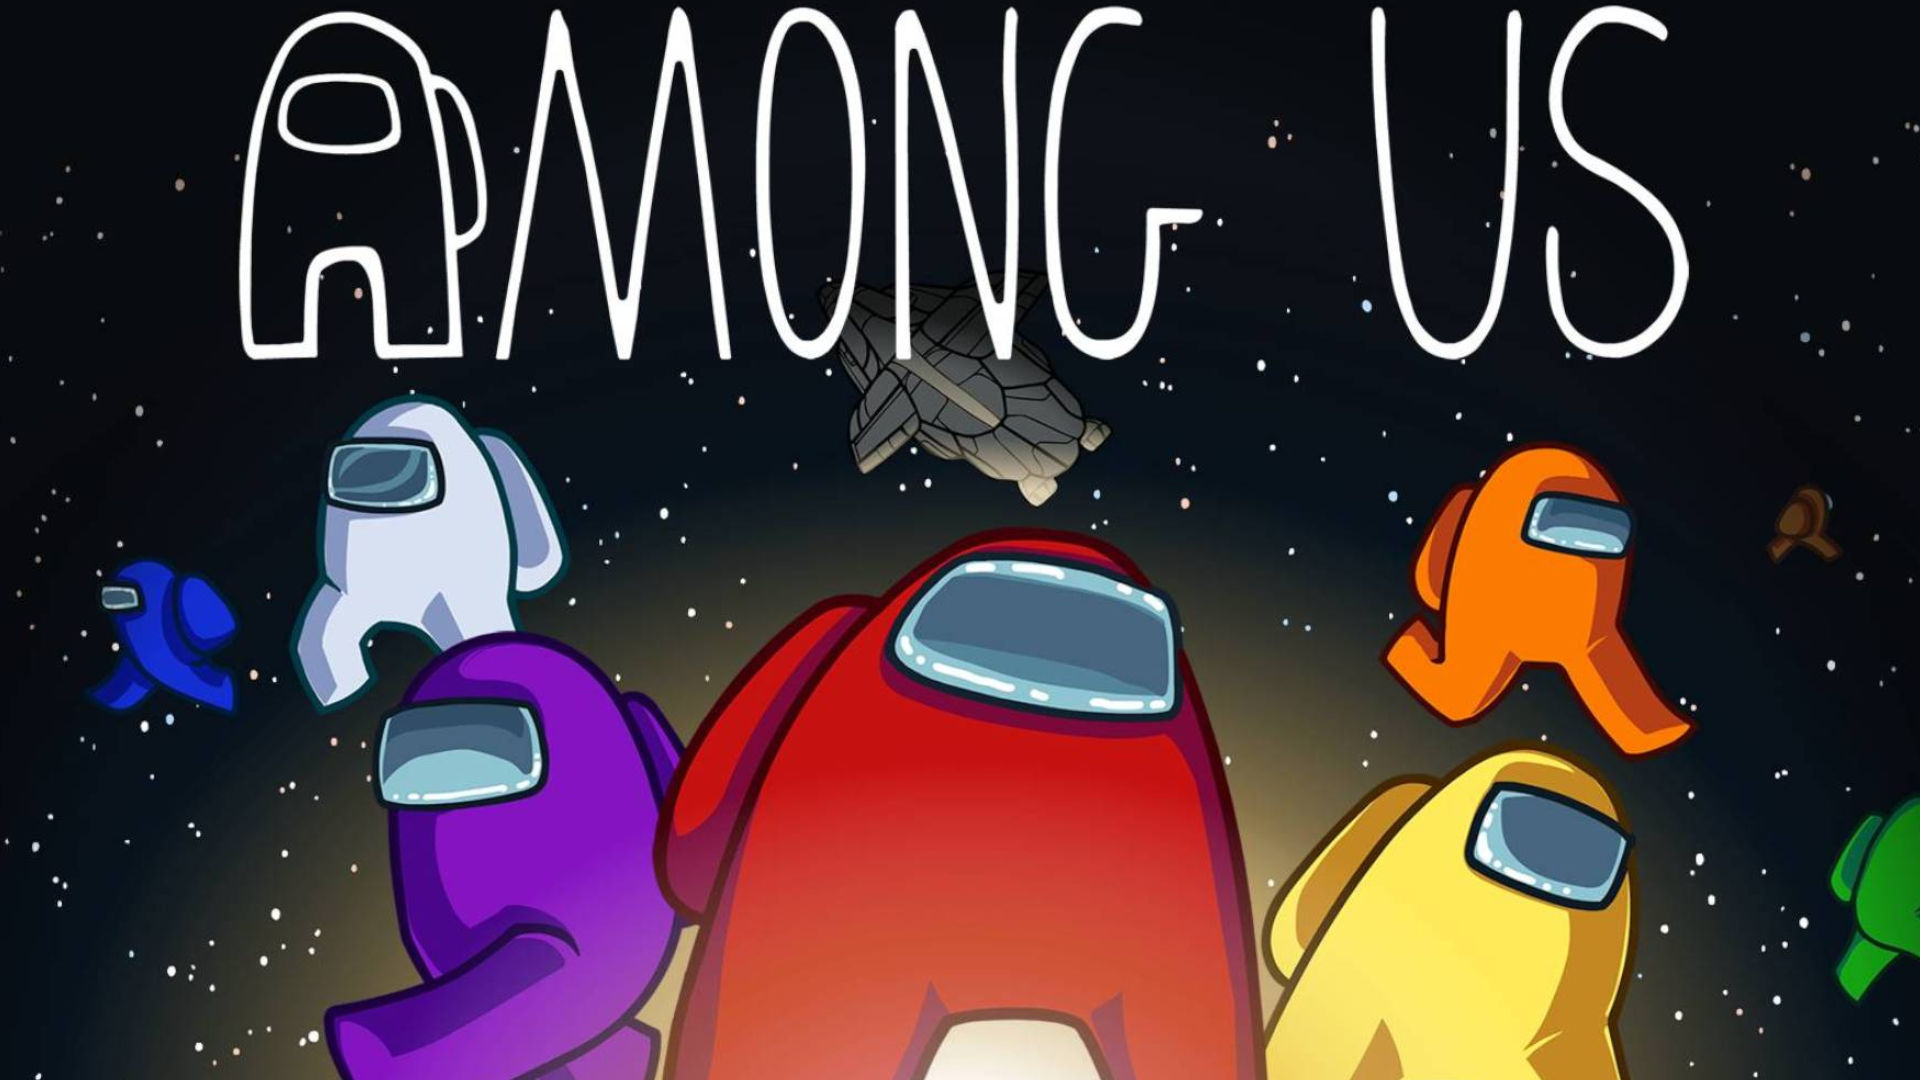 Best space games: Among Us. Image shows the iconic colourful crewmembers and the logo of the game.